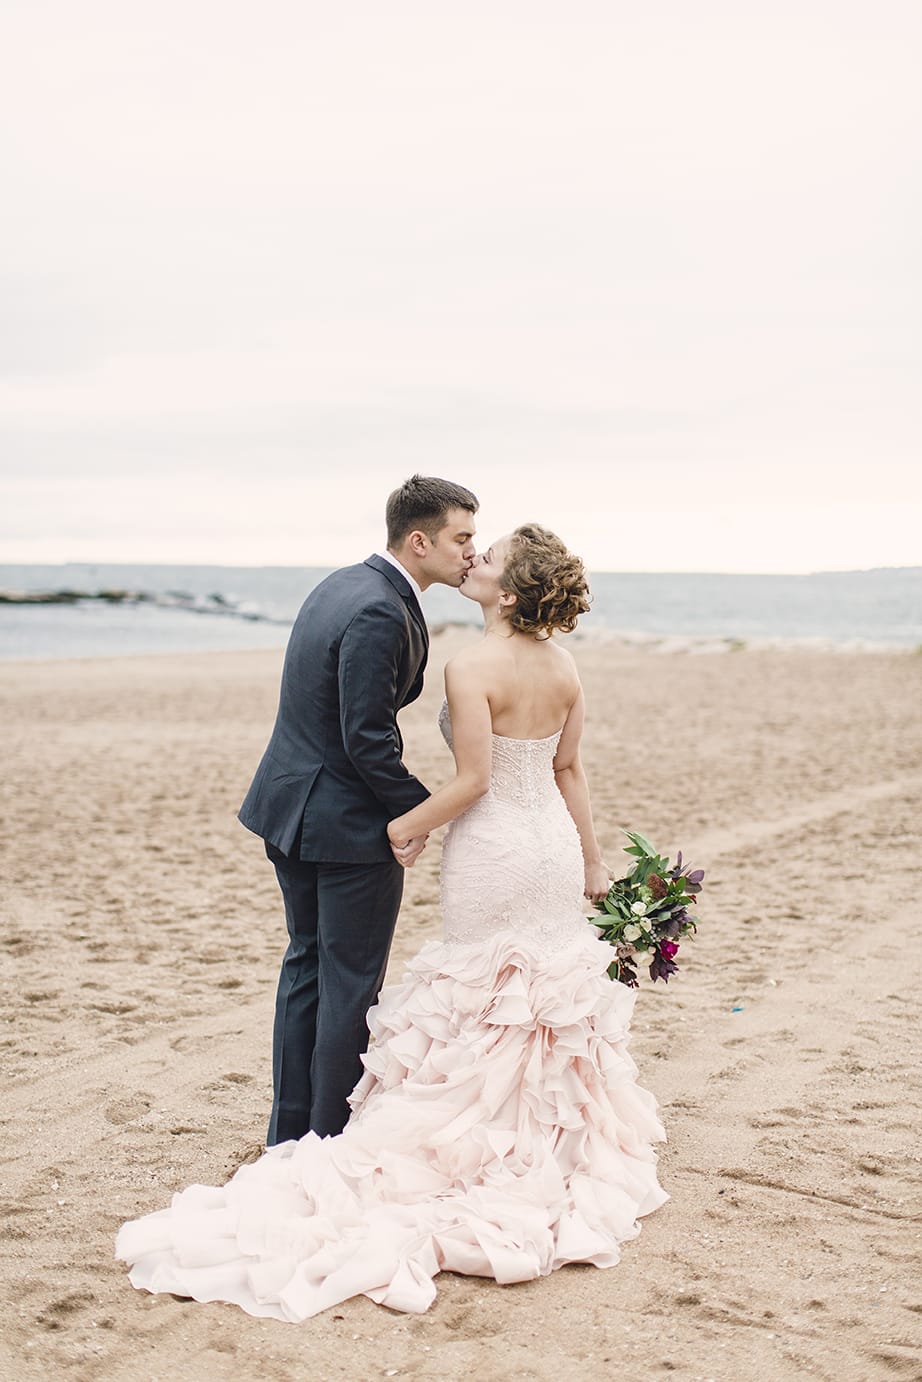 Blush Wedding Dress at Carnival-Themed Wedding - Maggie Bride wearing Serencia by Maggie Sottero